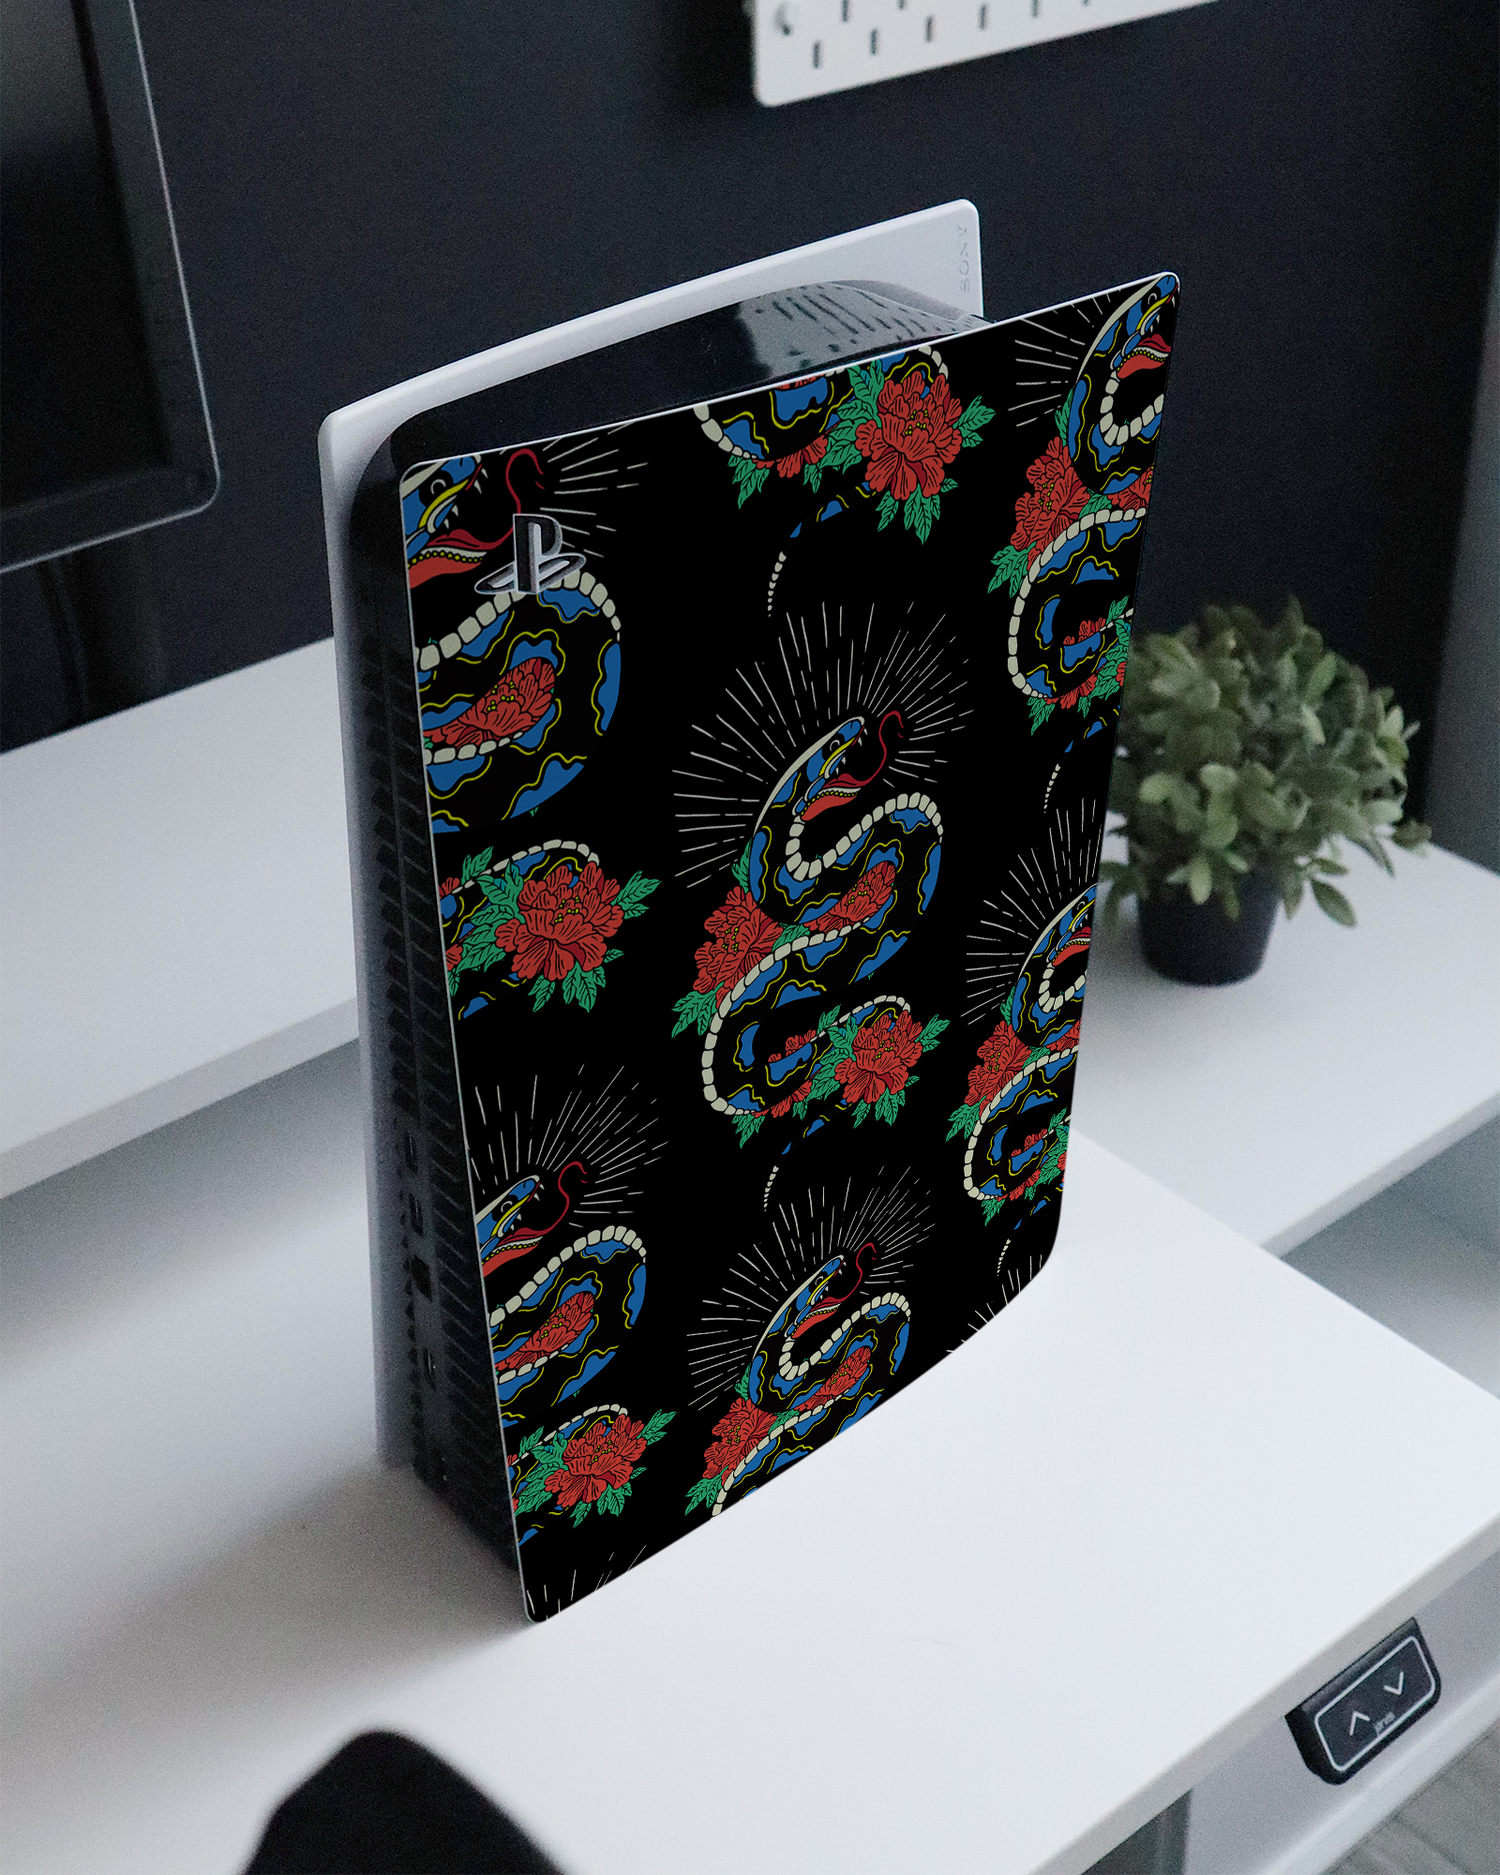 Repeating Snakes 2 Console Skin for Sony PlayStation 5 standing on a sideboard 